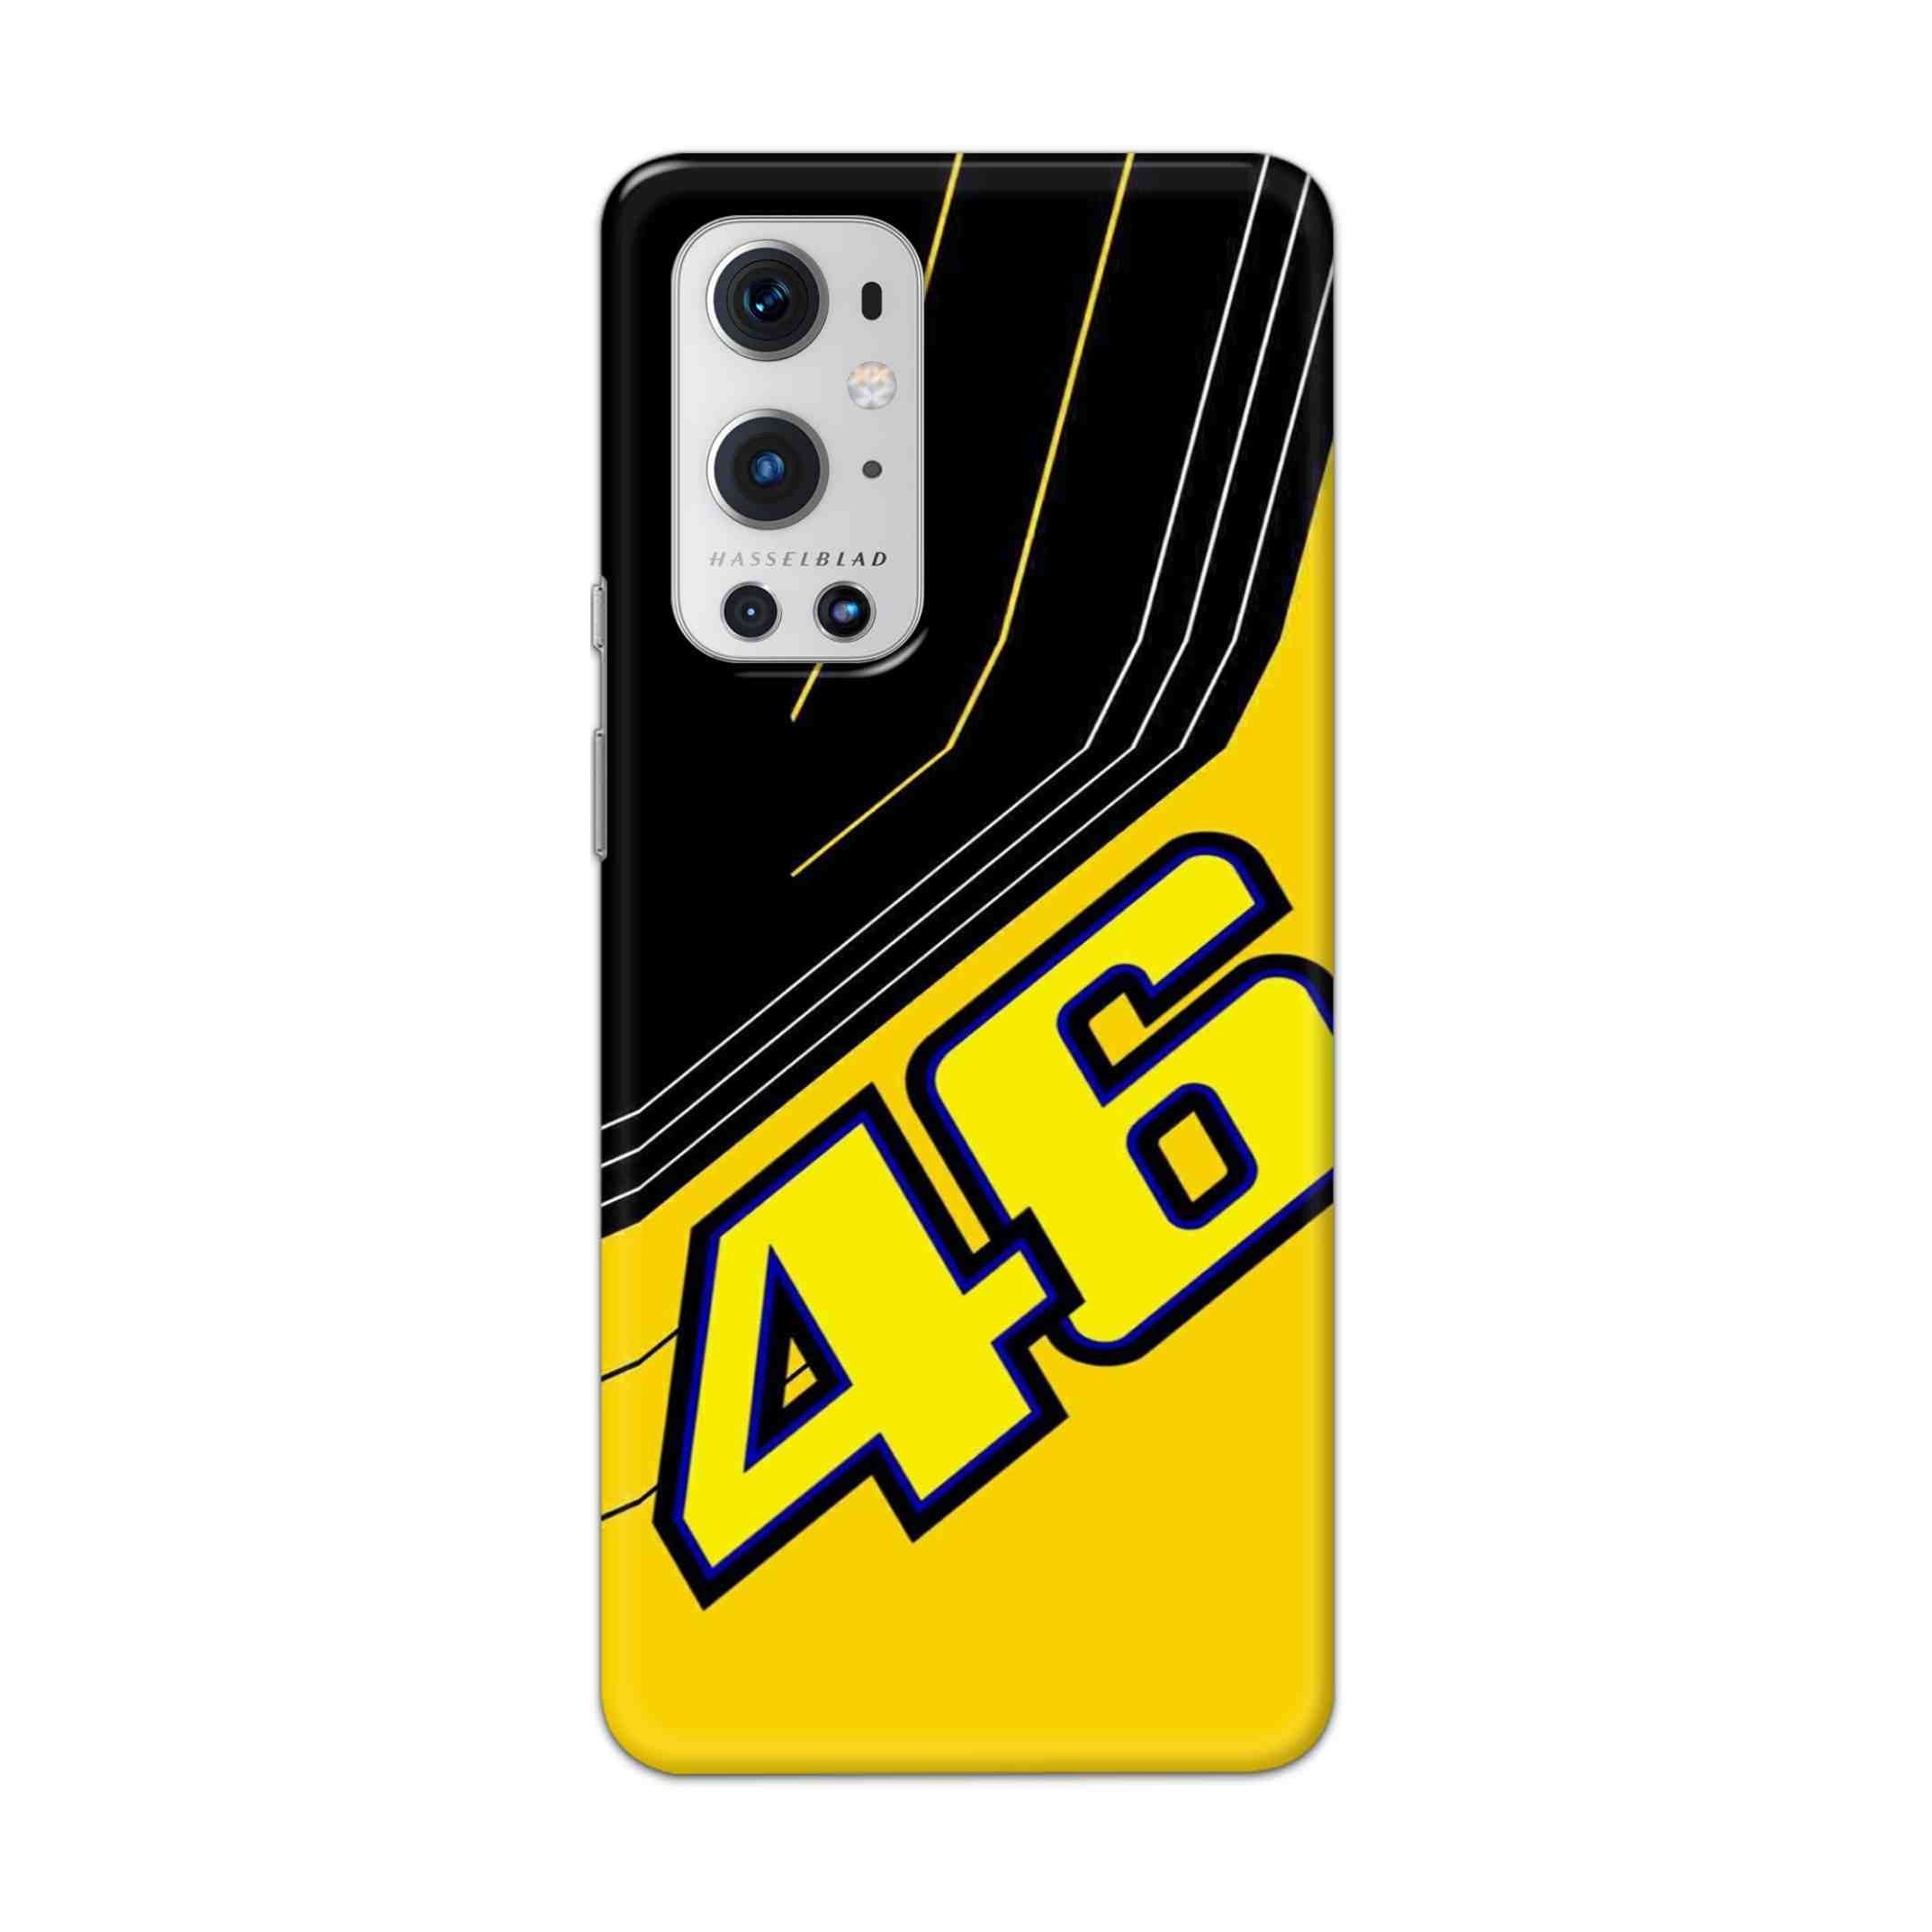 Buy 46 Hard Back Mobile Phone Case Cover For OnePlus 9 Pro Online